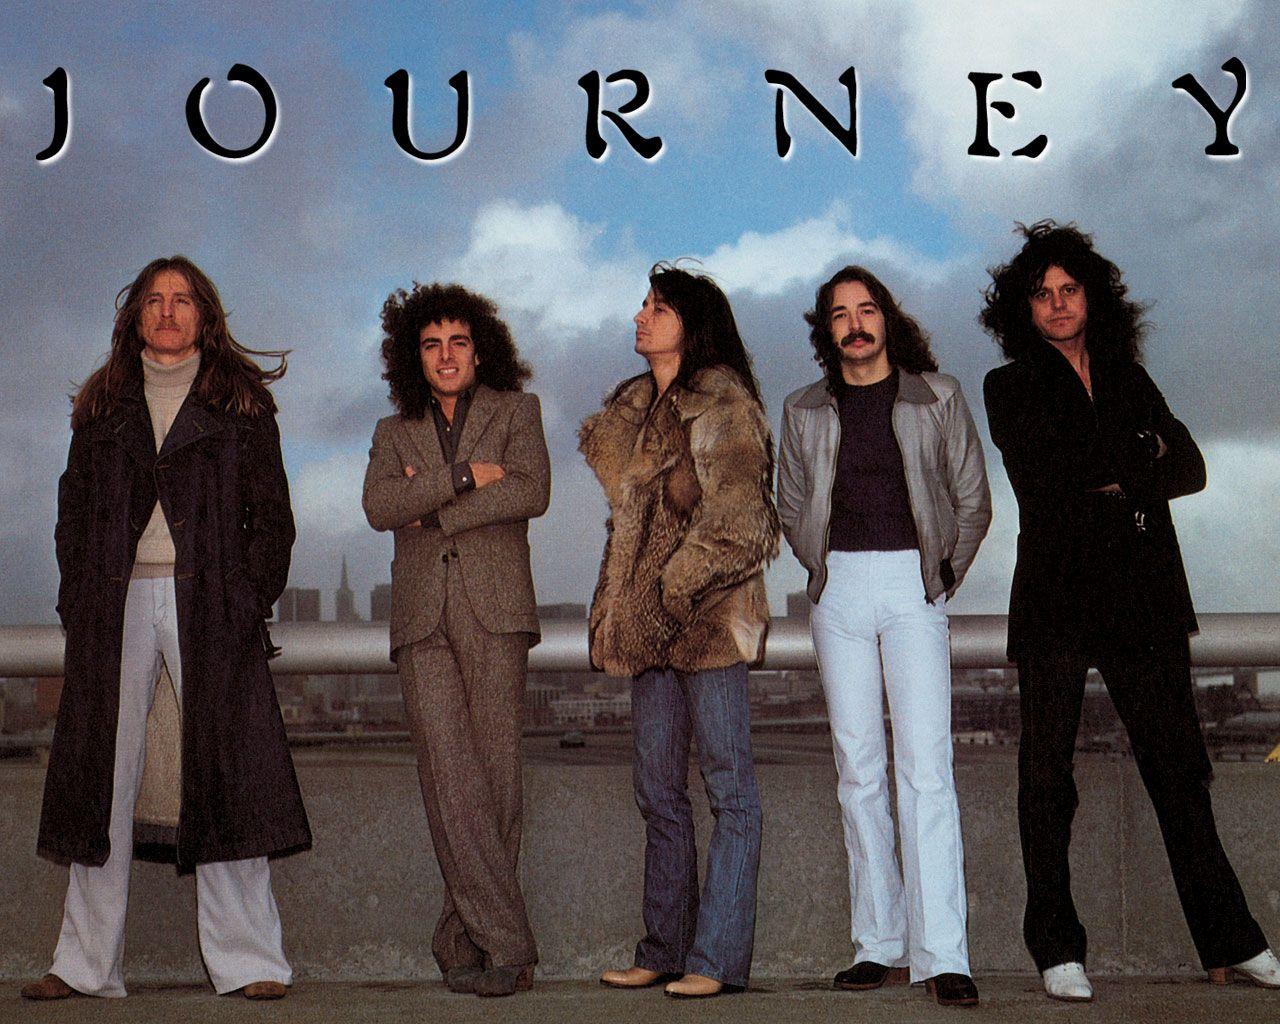 Guess The Journey Song!